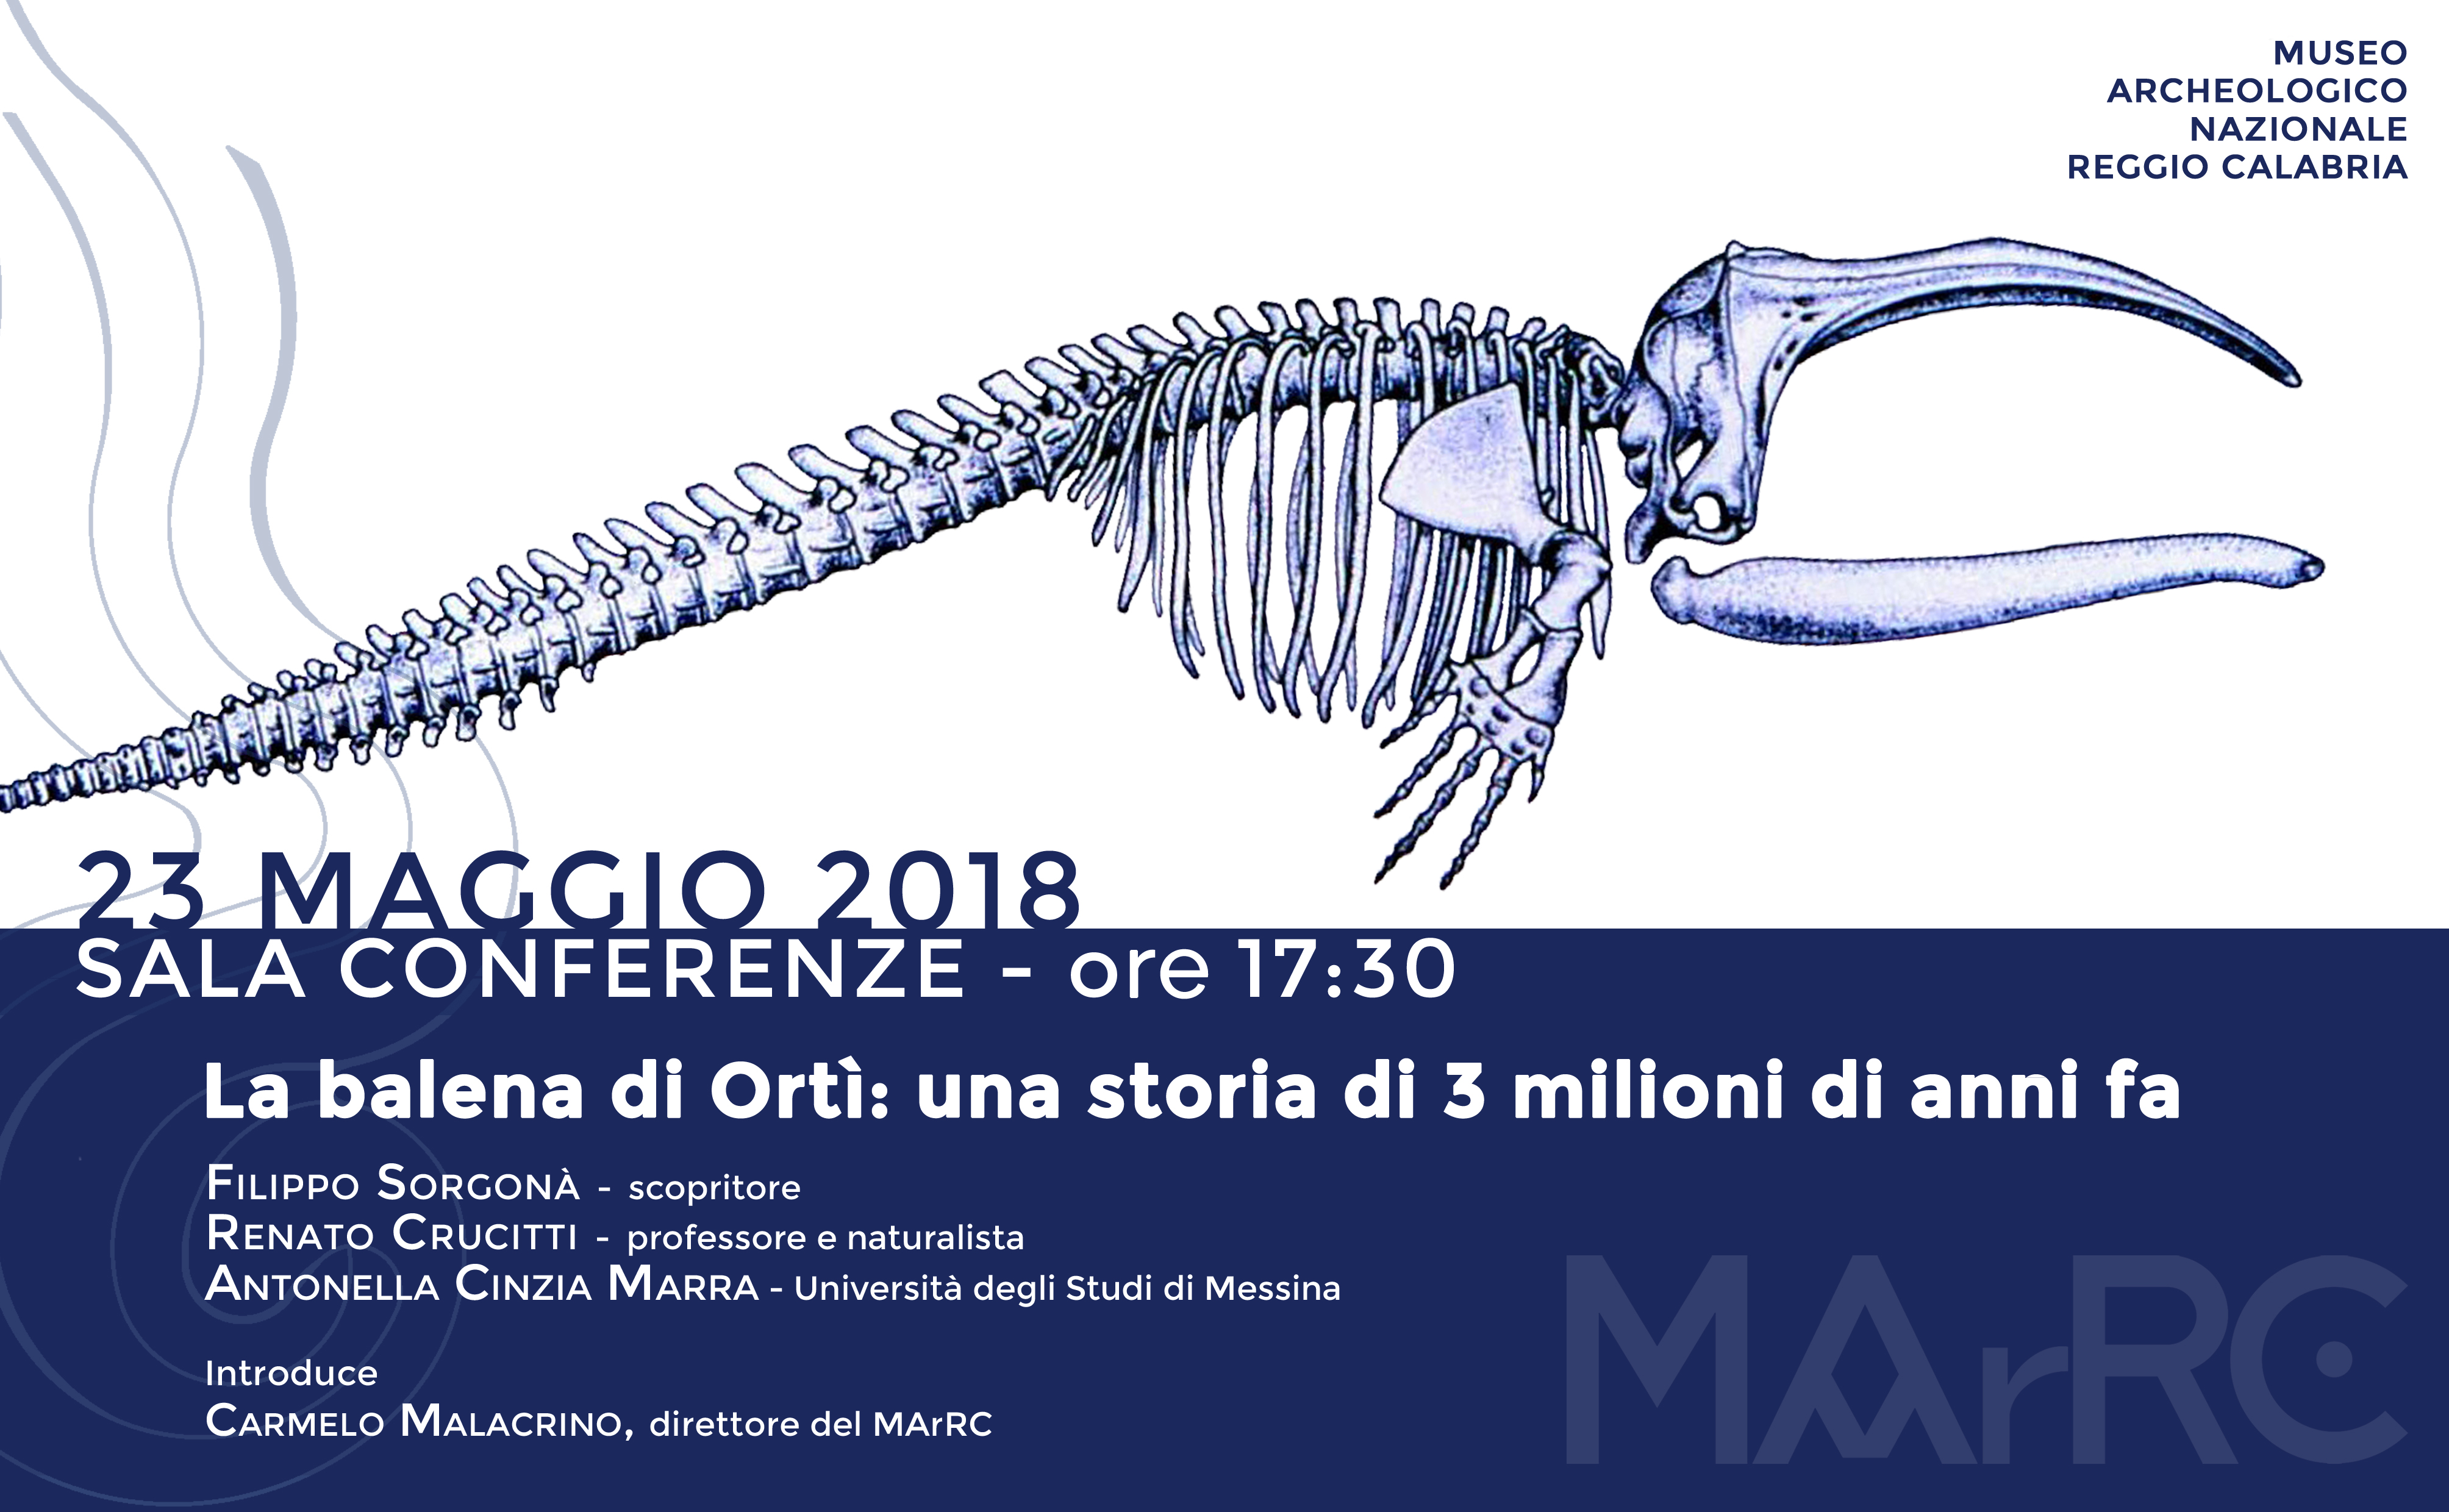 The fossil whale form Ortì